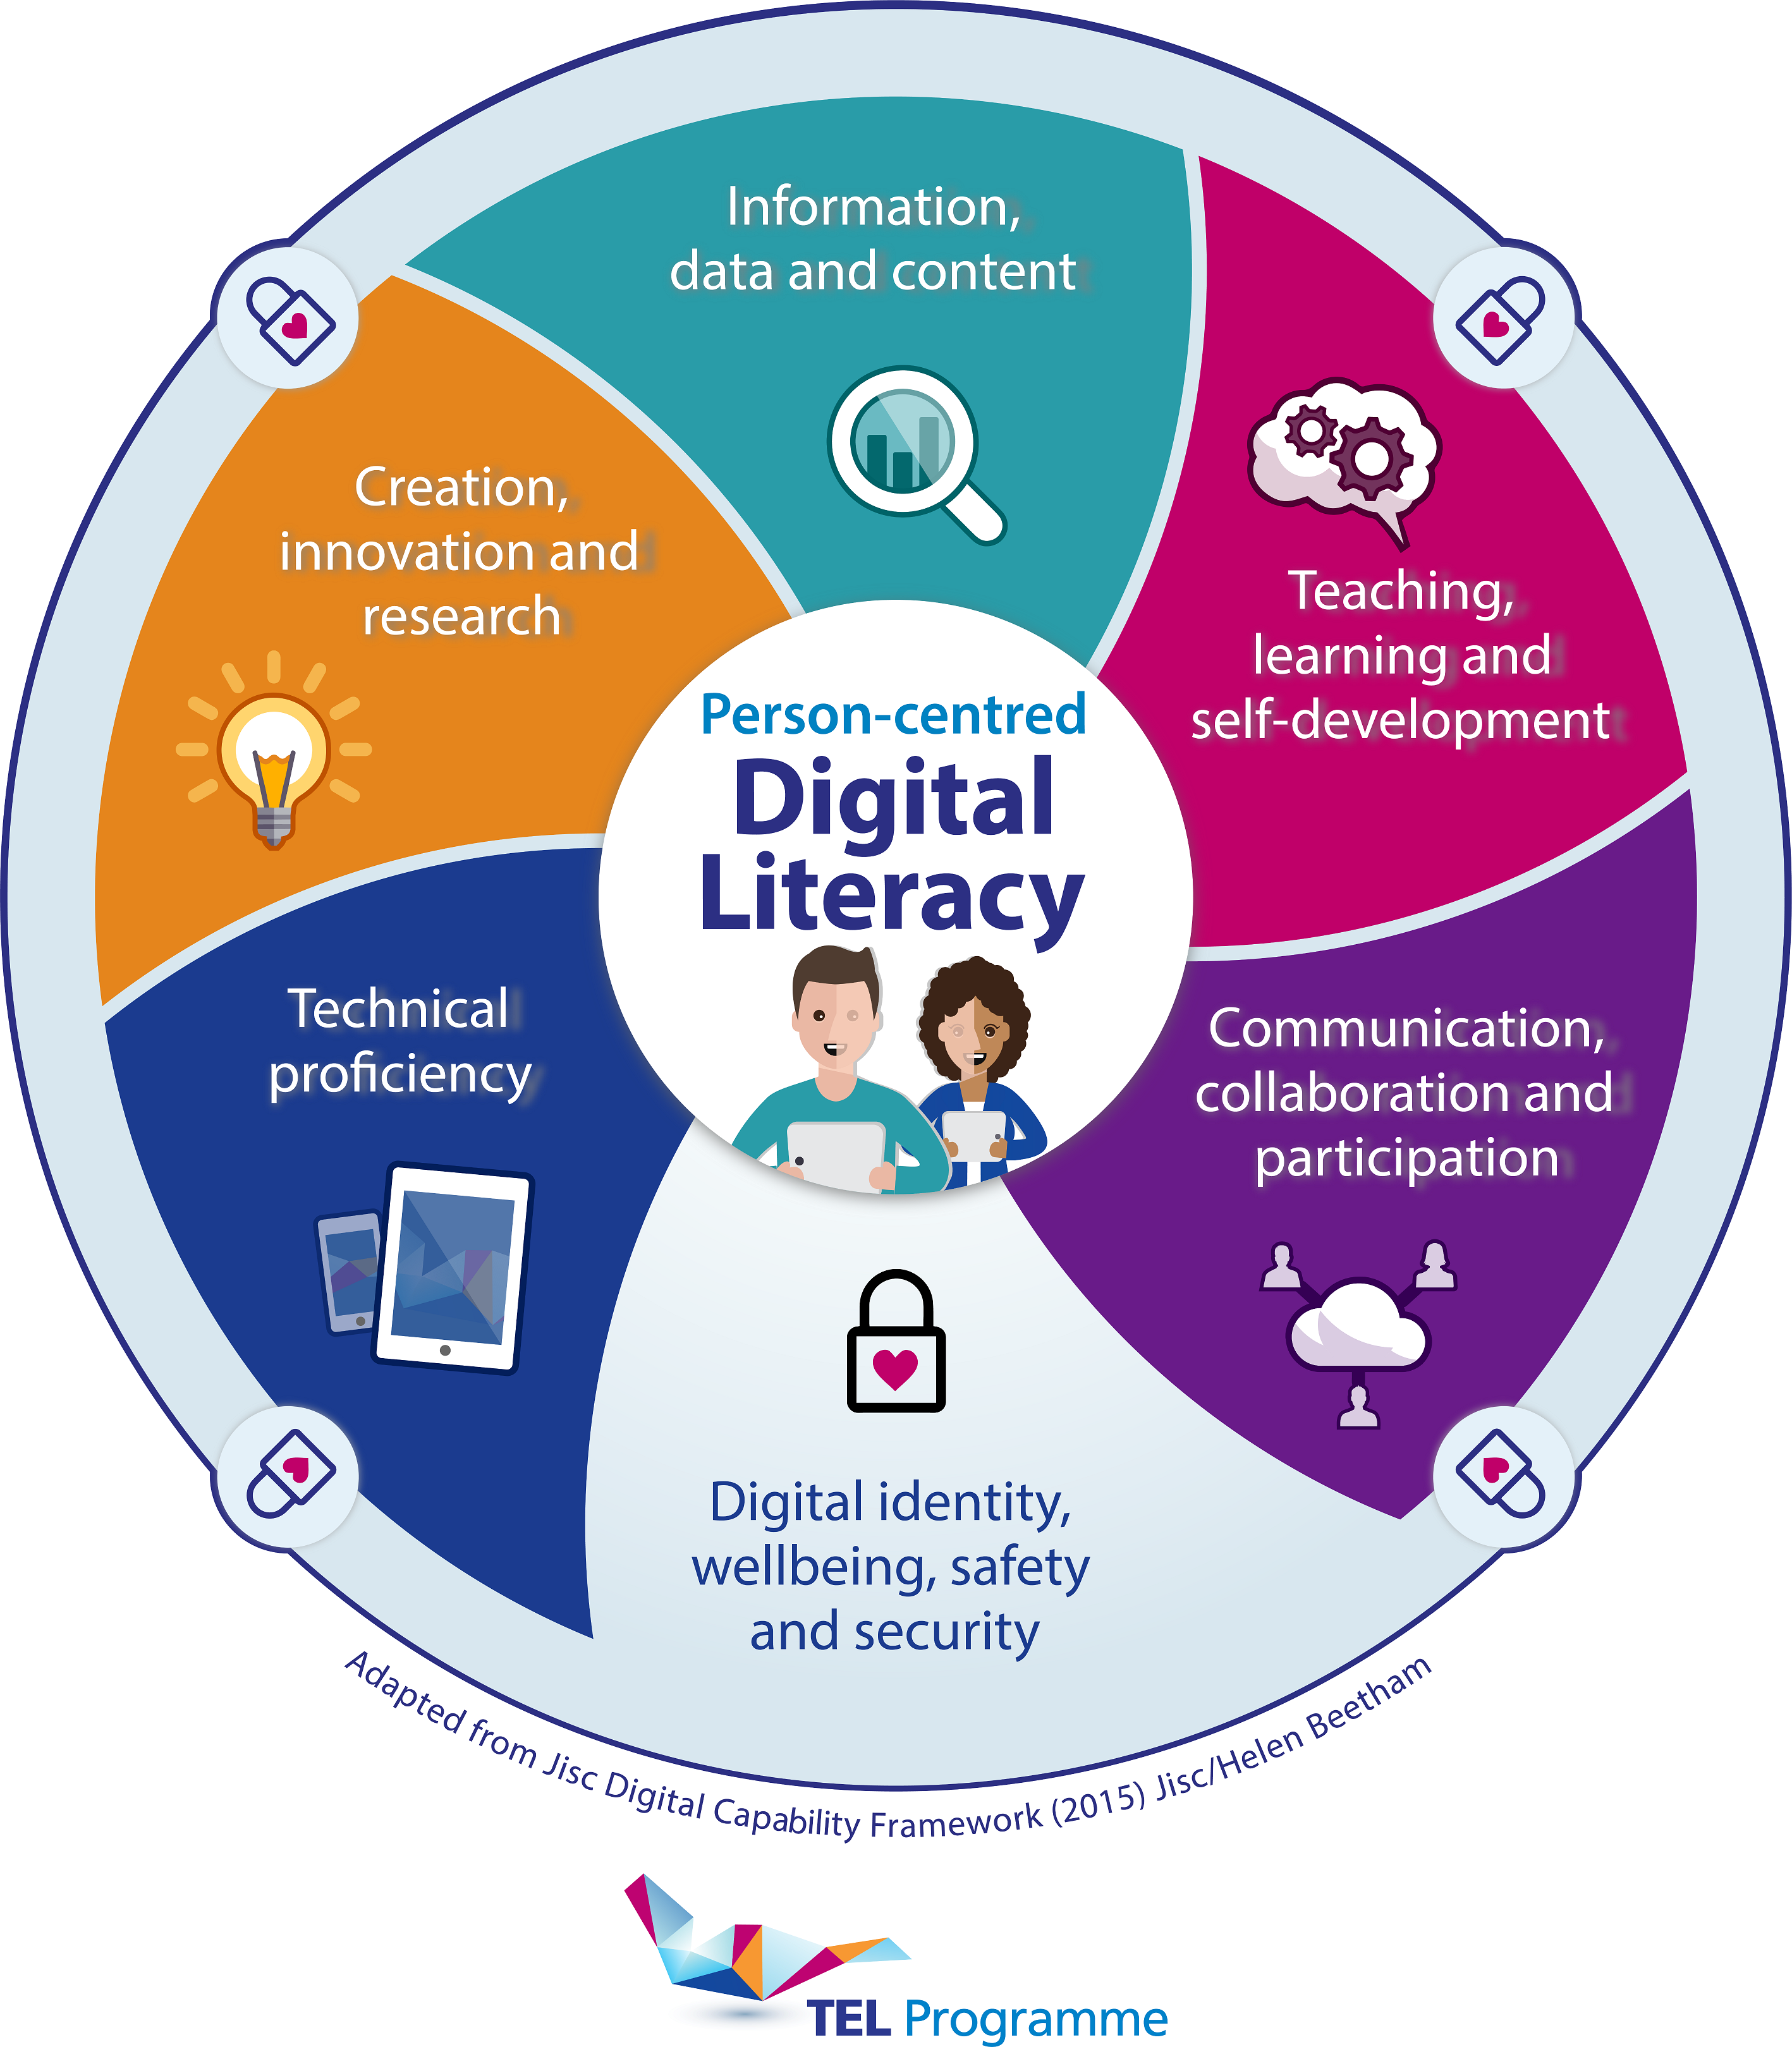 What is Digital Literacy? - Information, data and content. - Teaching, learning and self-development. - Communication, collaboration and participation. - Digital identity, wellbeing, safety and security. - Technical Proficiency. - Creation, innovation and research. 